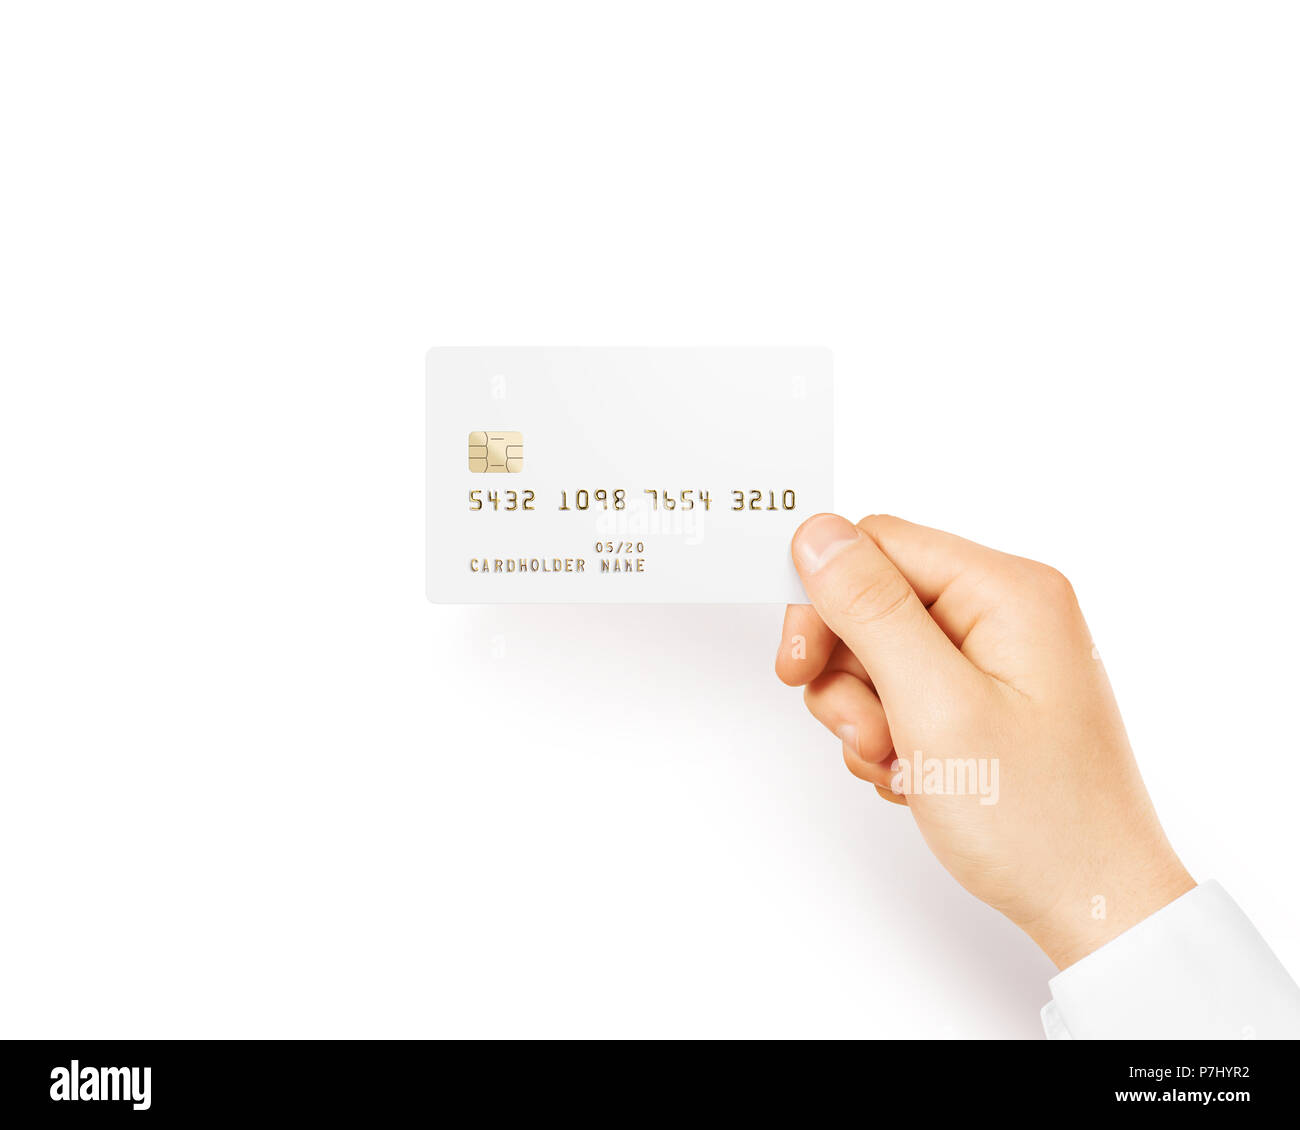 Hand holding blank white credit card mockup isolated. Empty plastic card mock up hold in arm. Clear surface bank card with electronic chip. Debit card concept design presentation template. Stock Photo